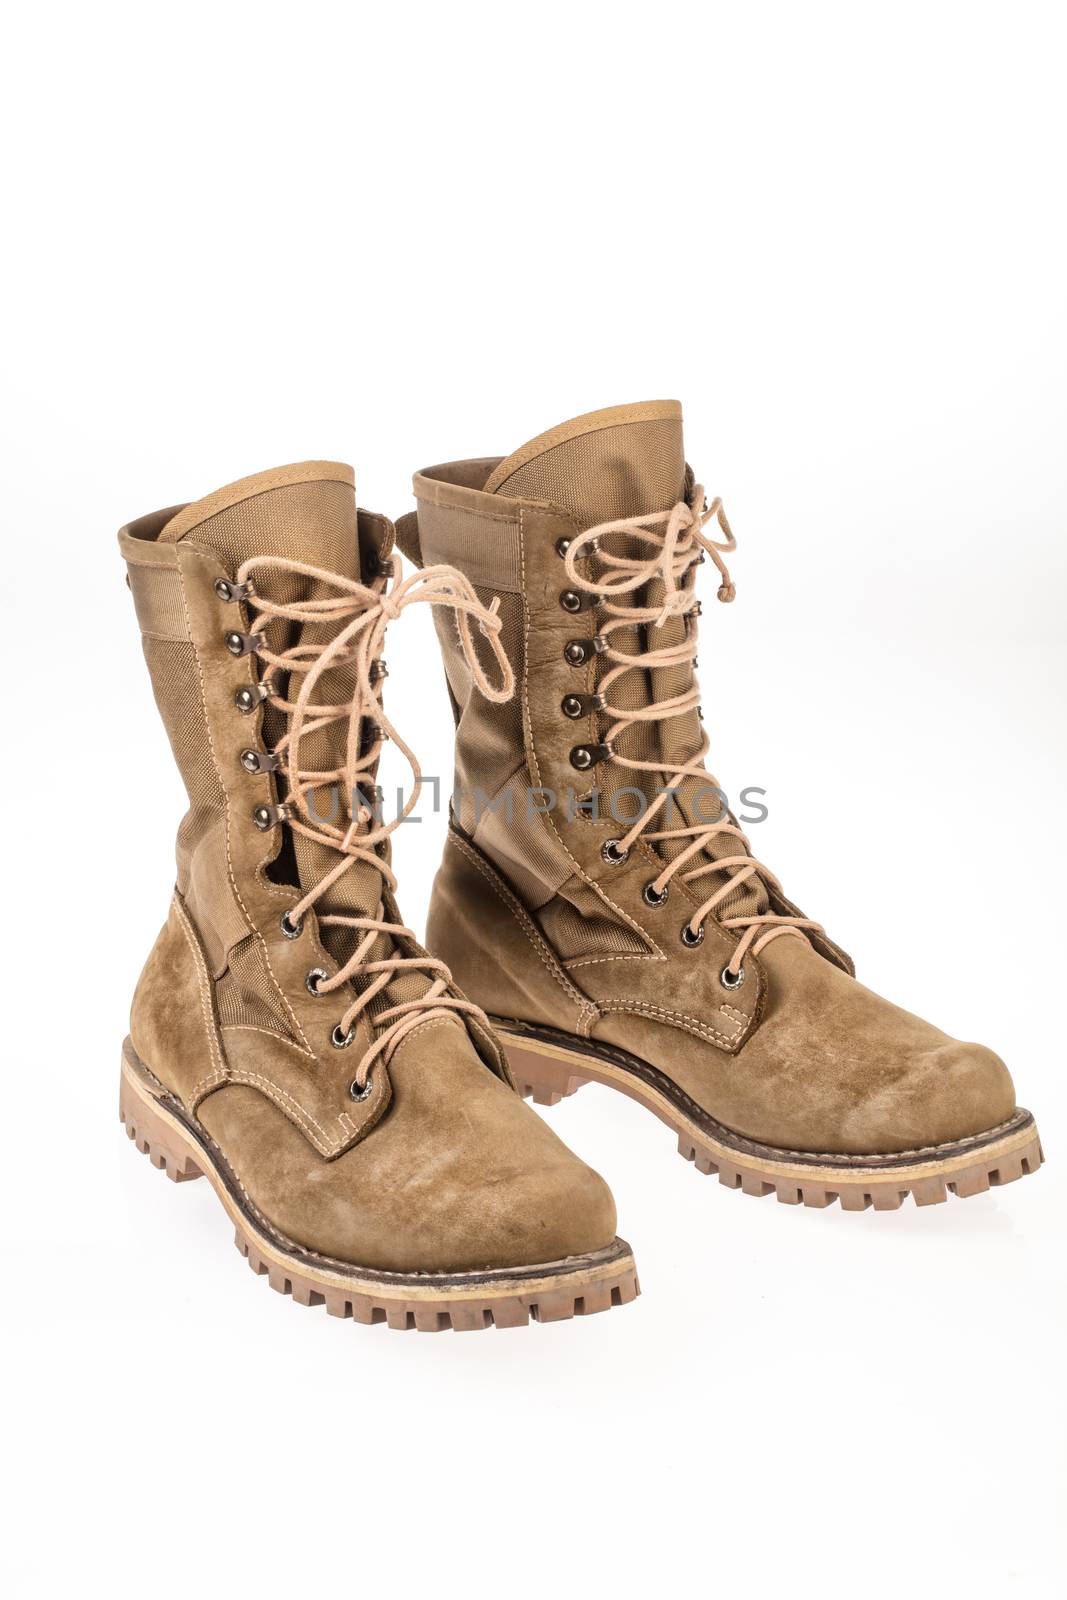 Pair of army boots on an isolated studio background